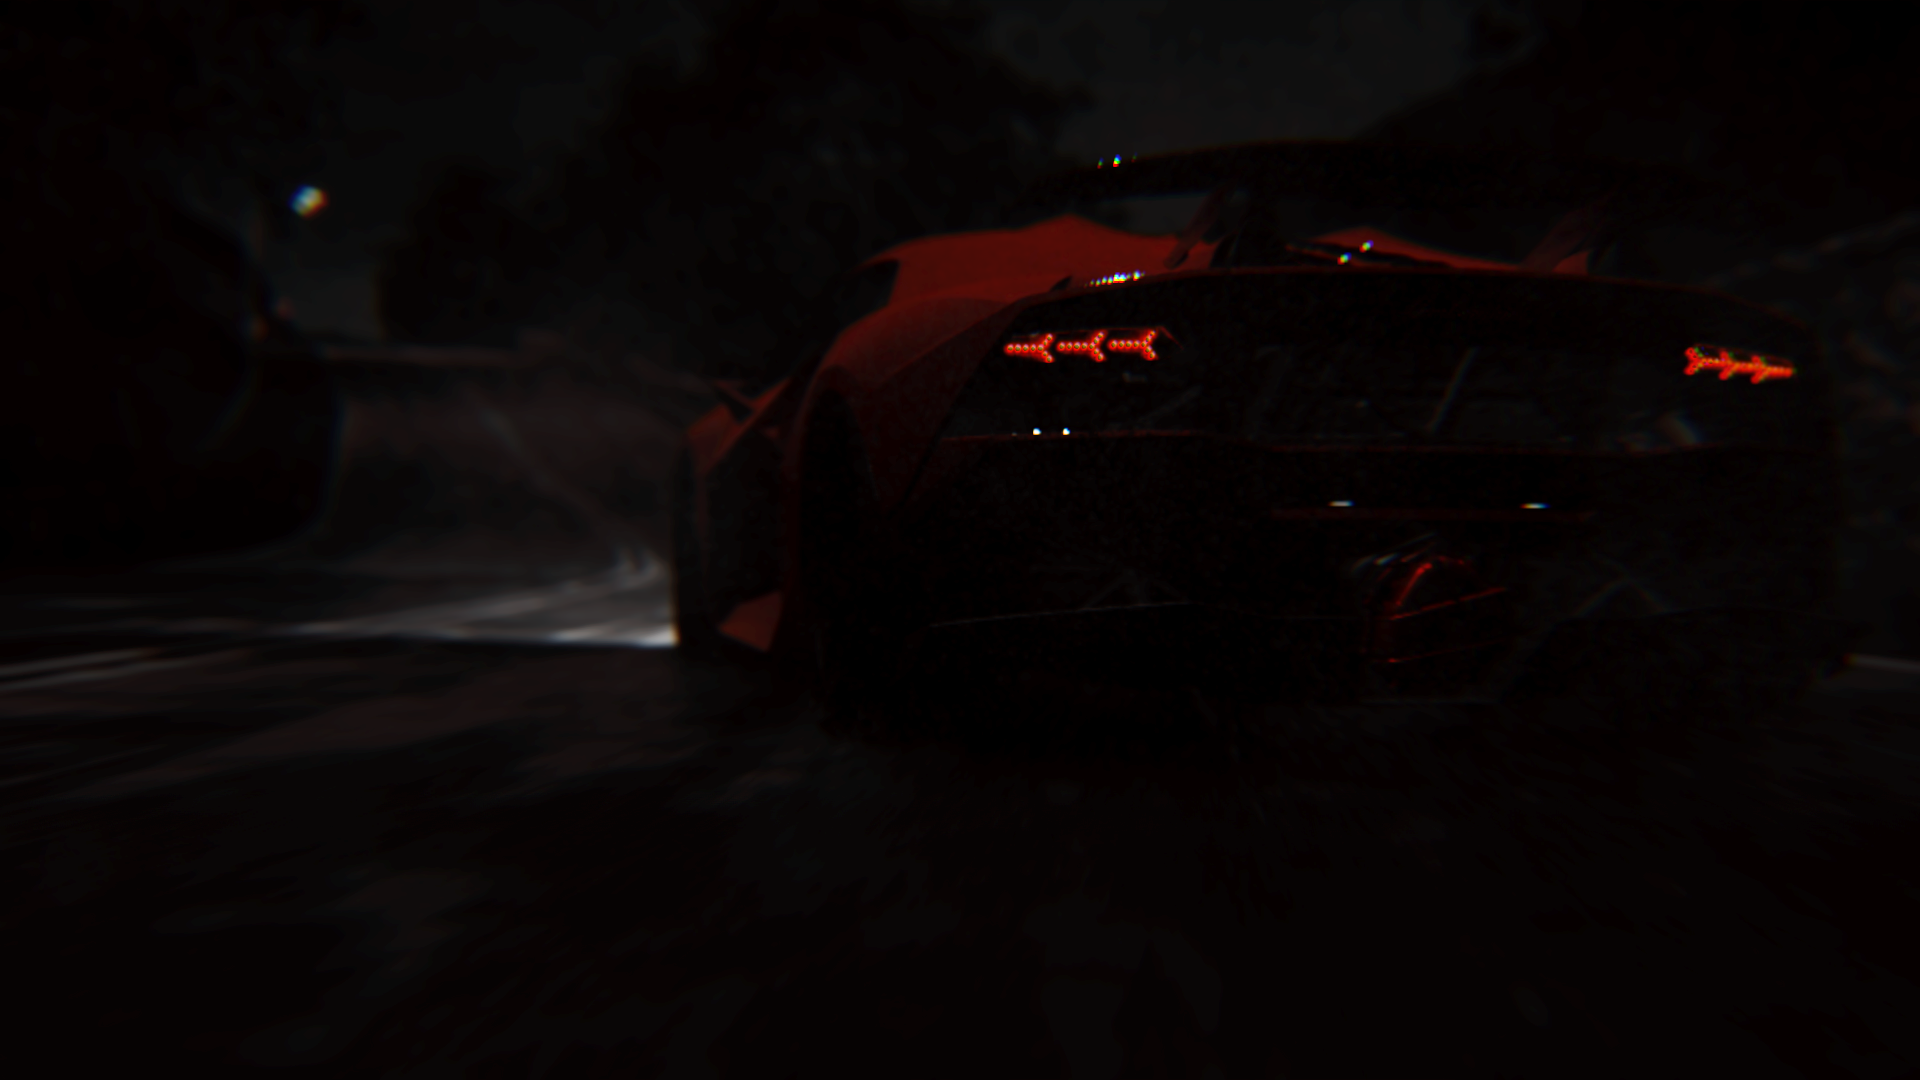 Video Game Project Cars 2 HD Wallpaper | Background Image